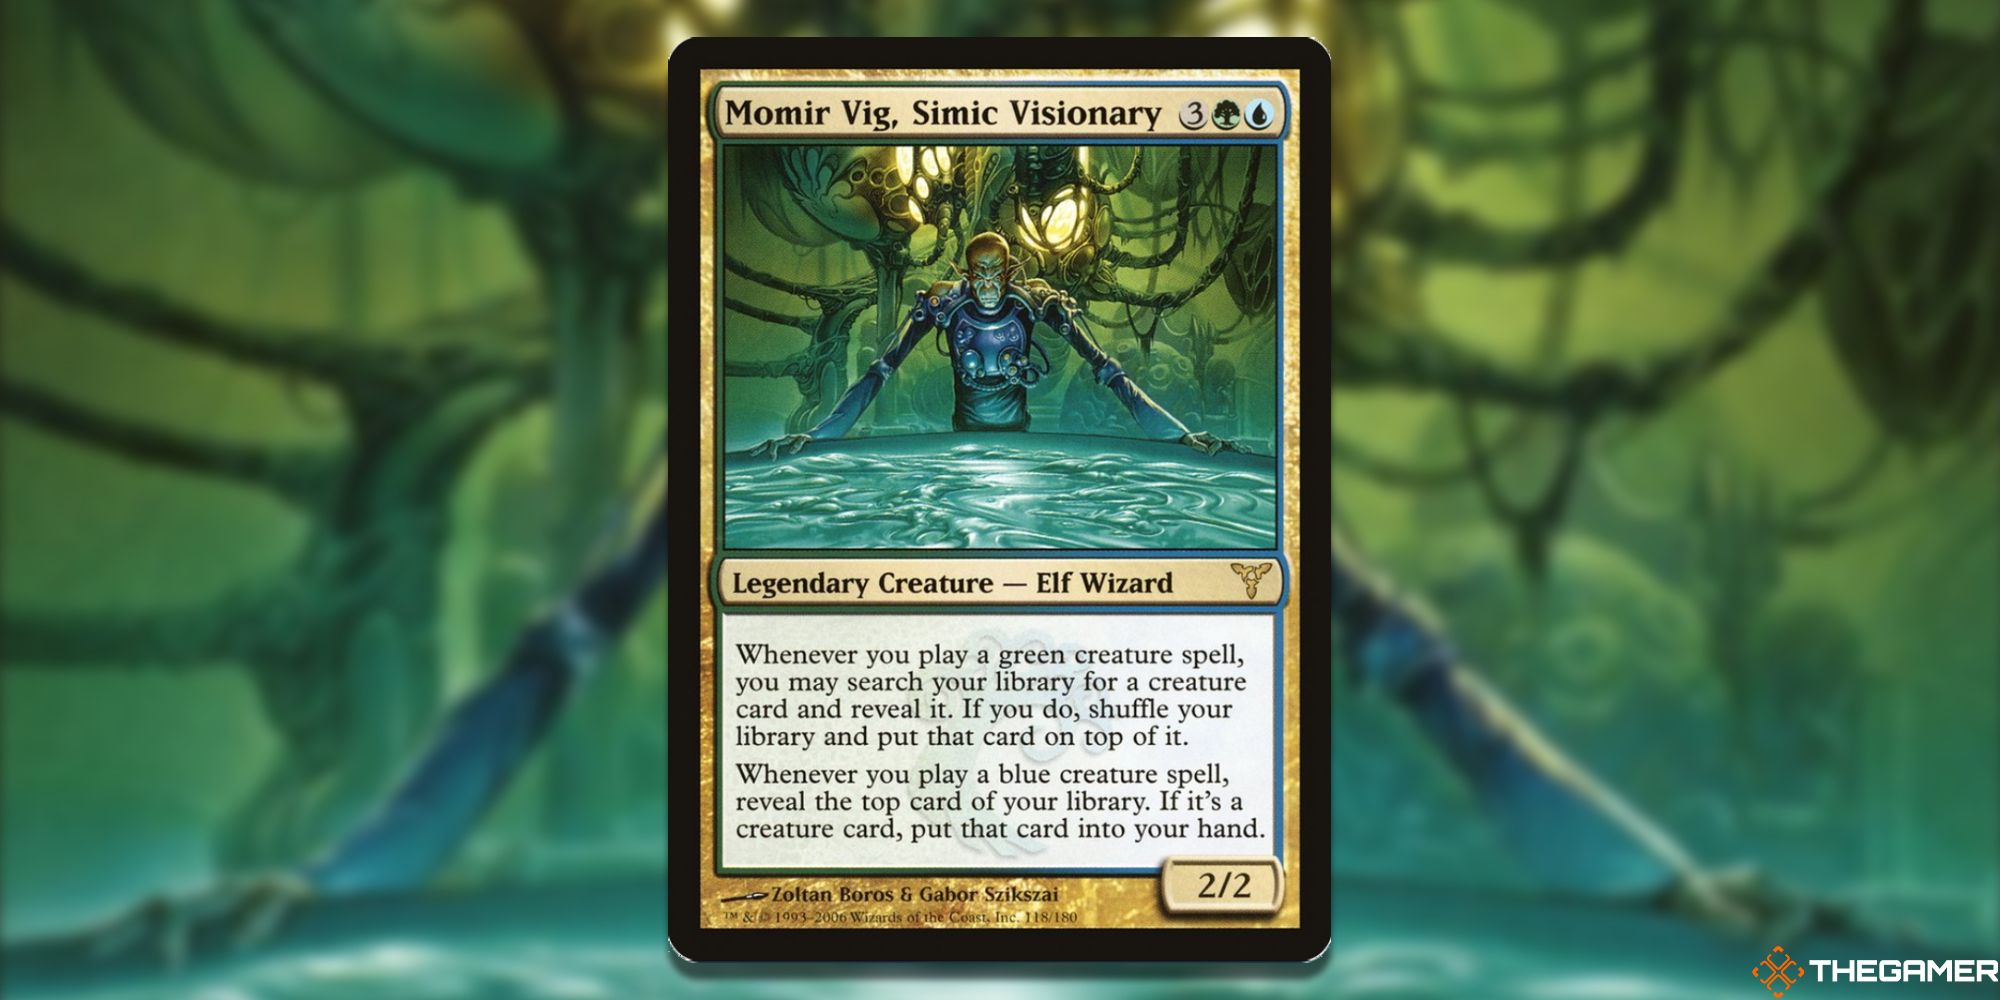 Image of the Momir Vig, Simic Visionary card in Magic: The Gathering, with art by Zoltan Boros & Gabor Szikszai